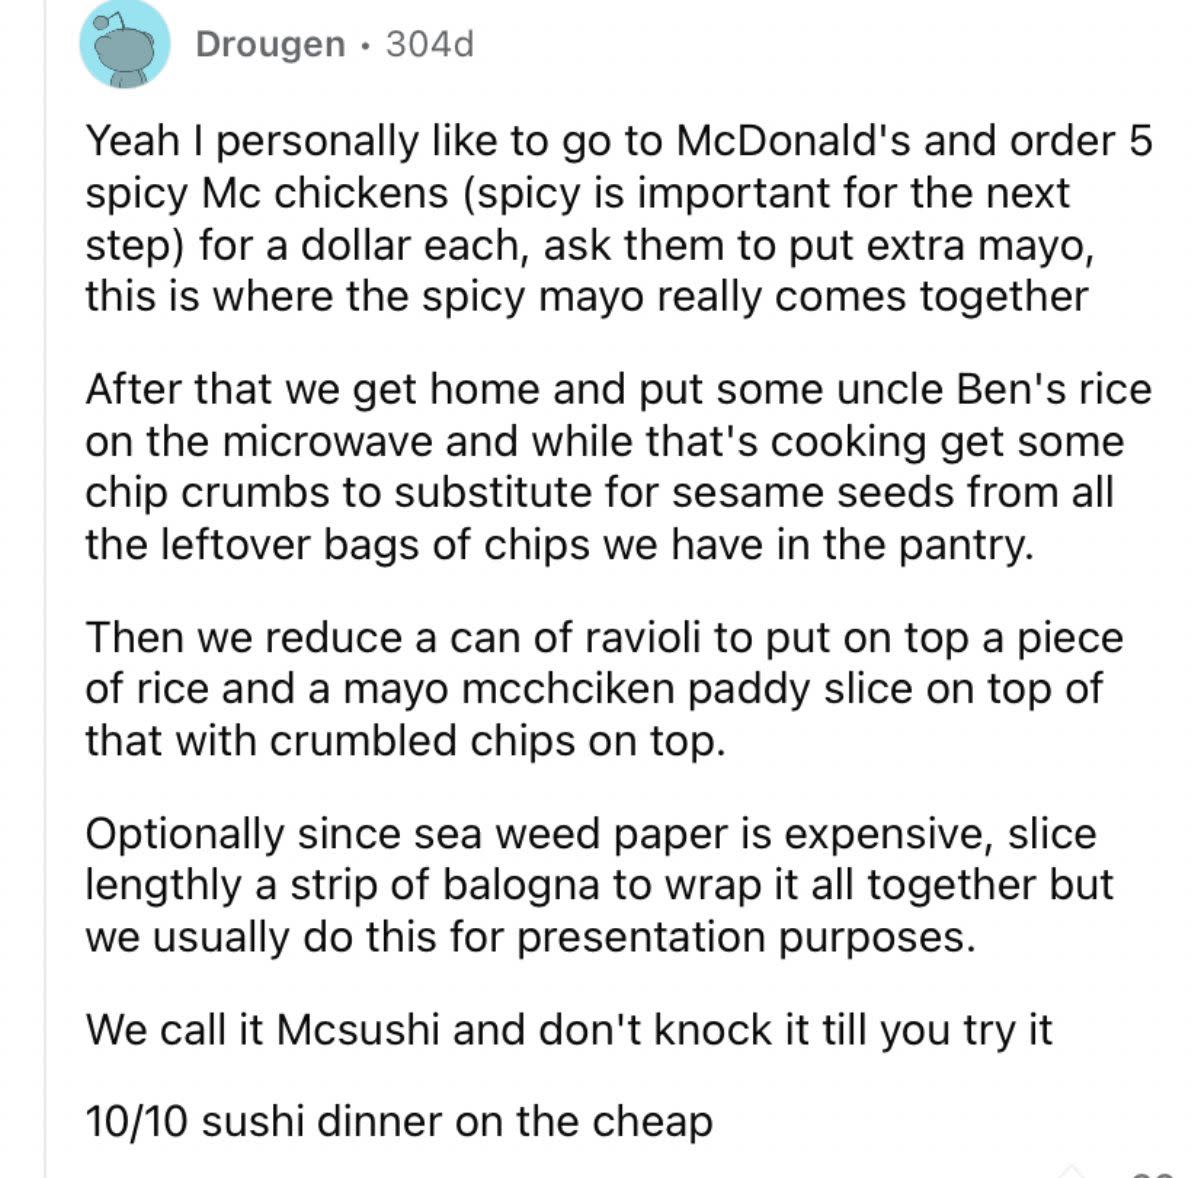 Reddit screenshot about recipe that uses McDonald's to save money.